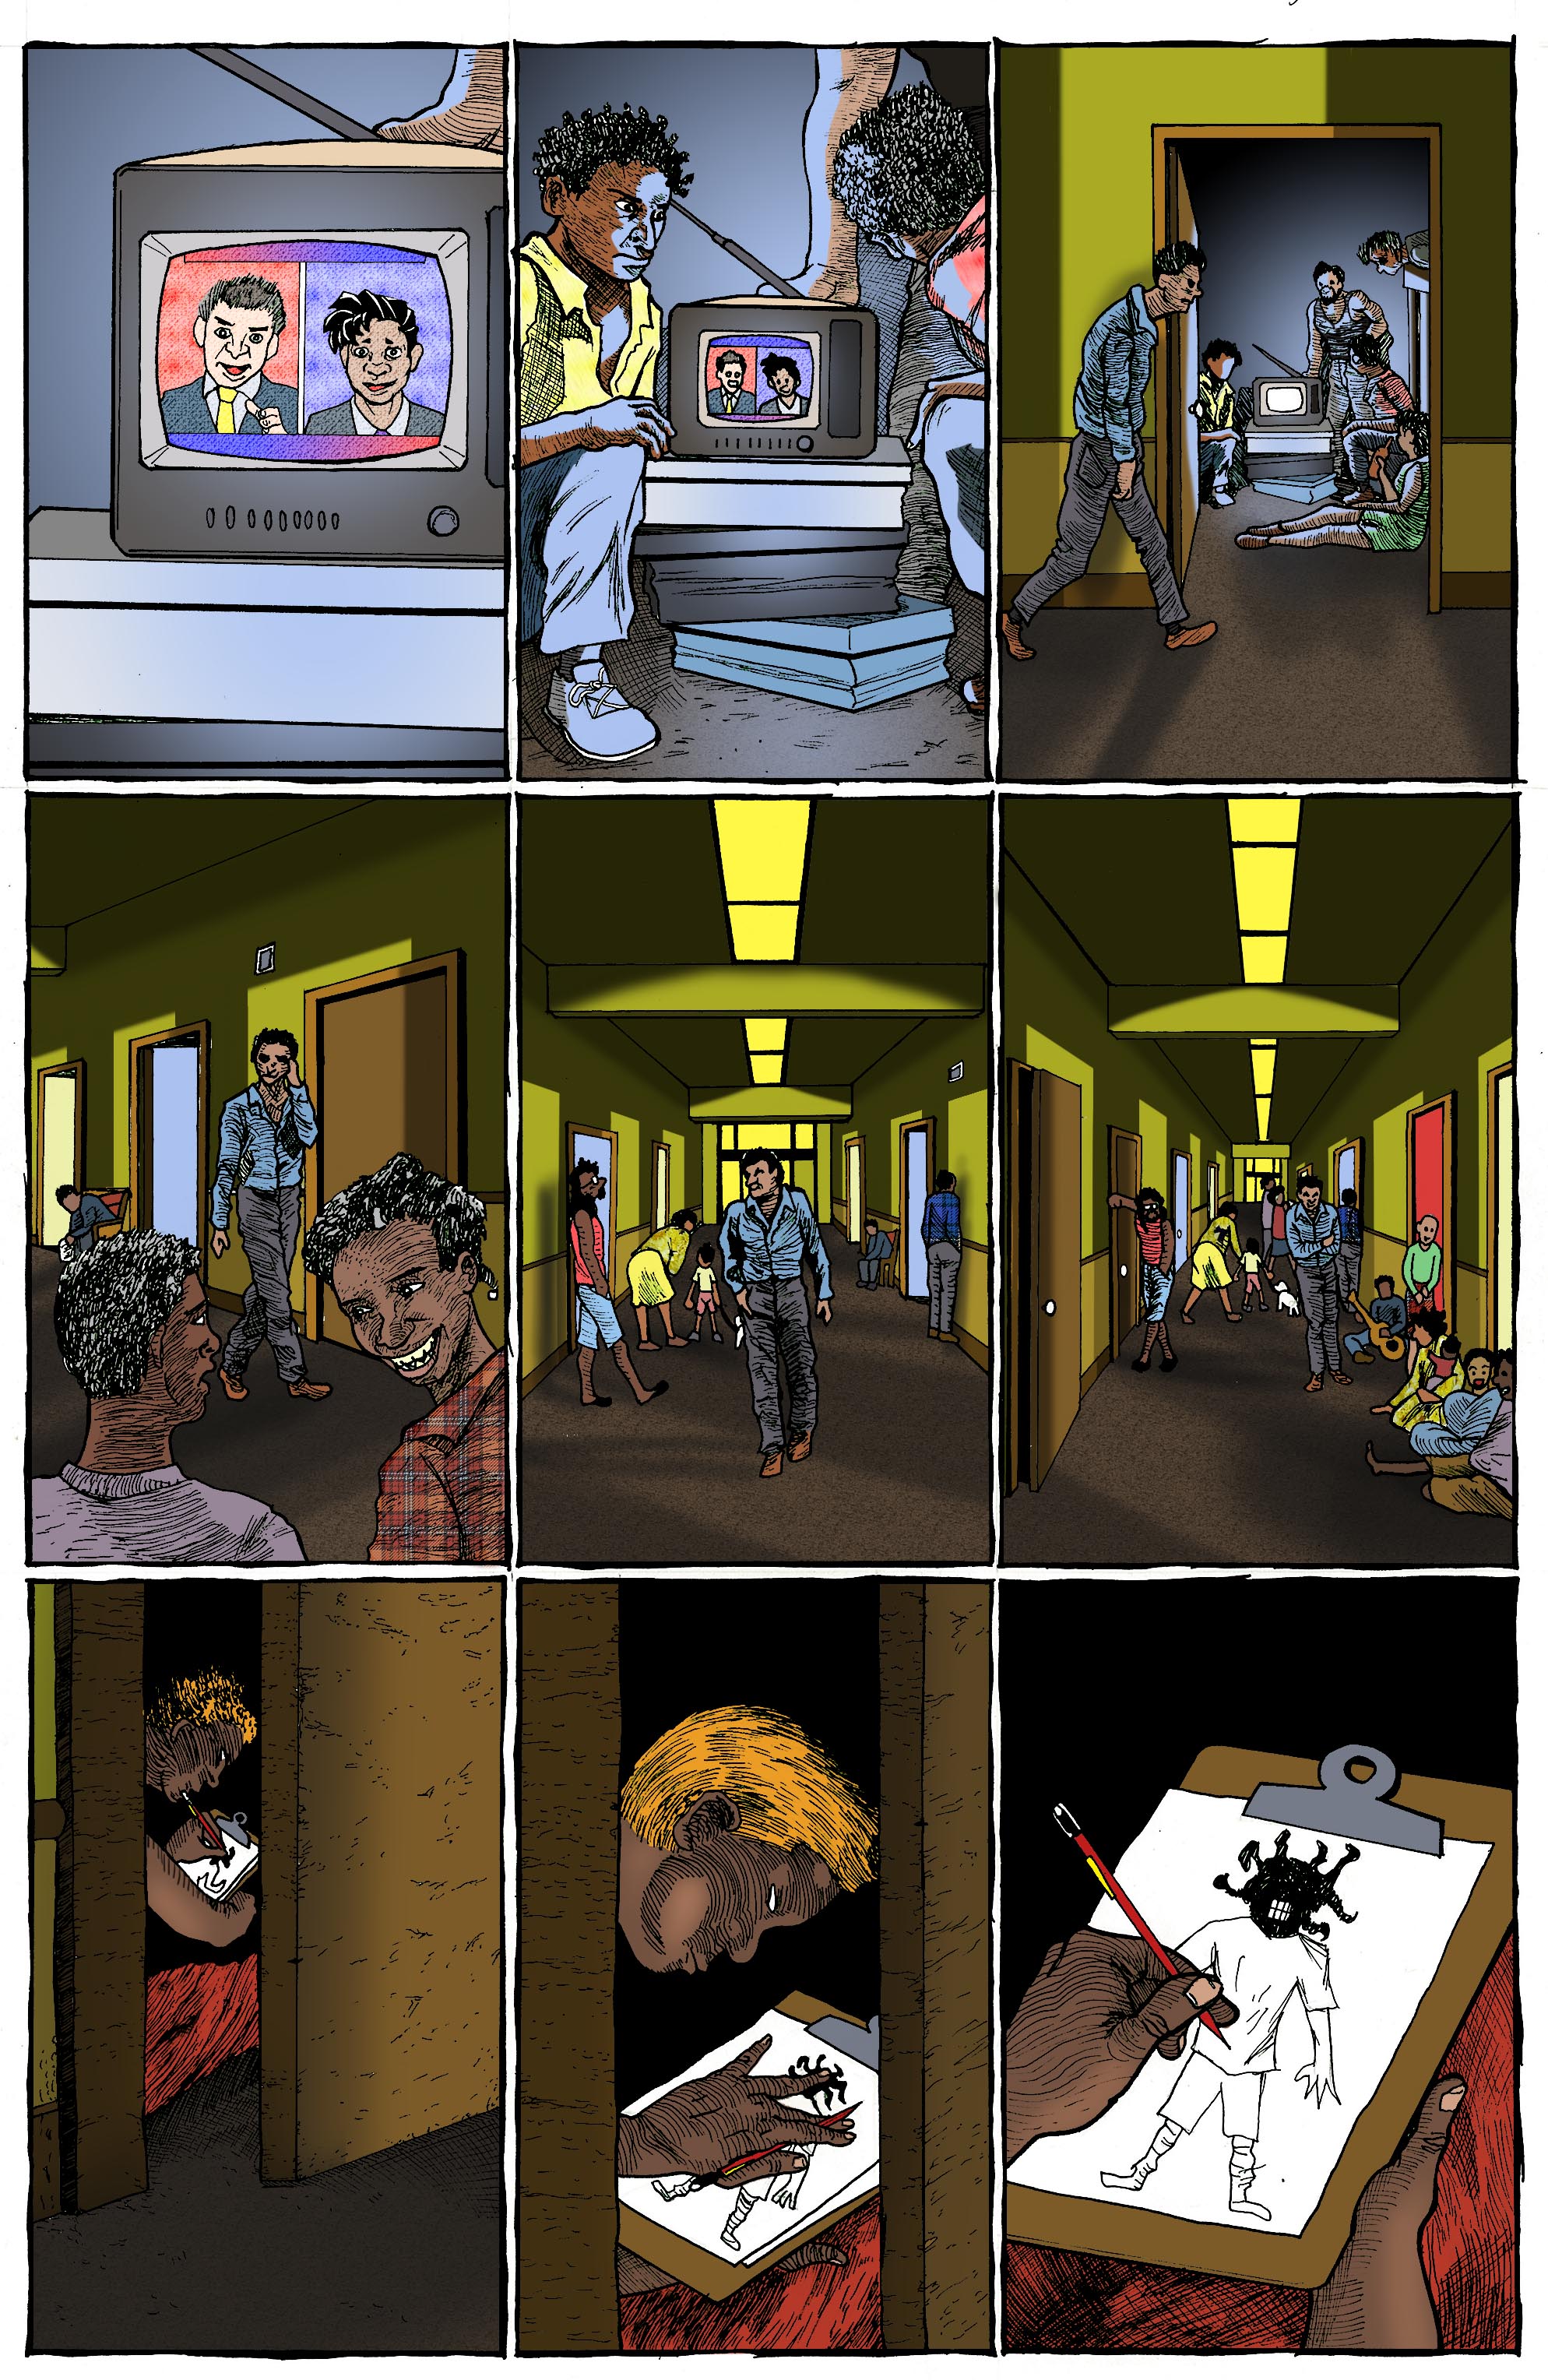 Chapter 5 Page 1 Small.jpg